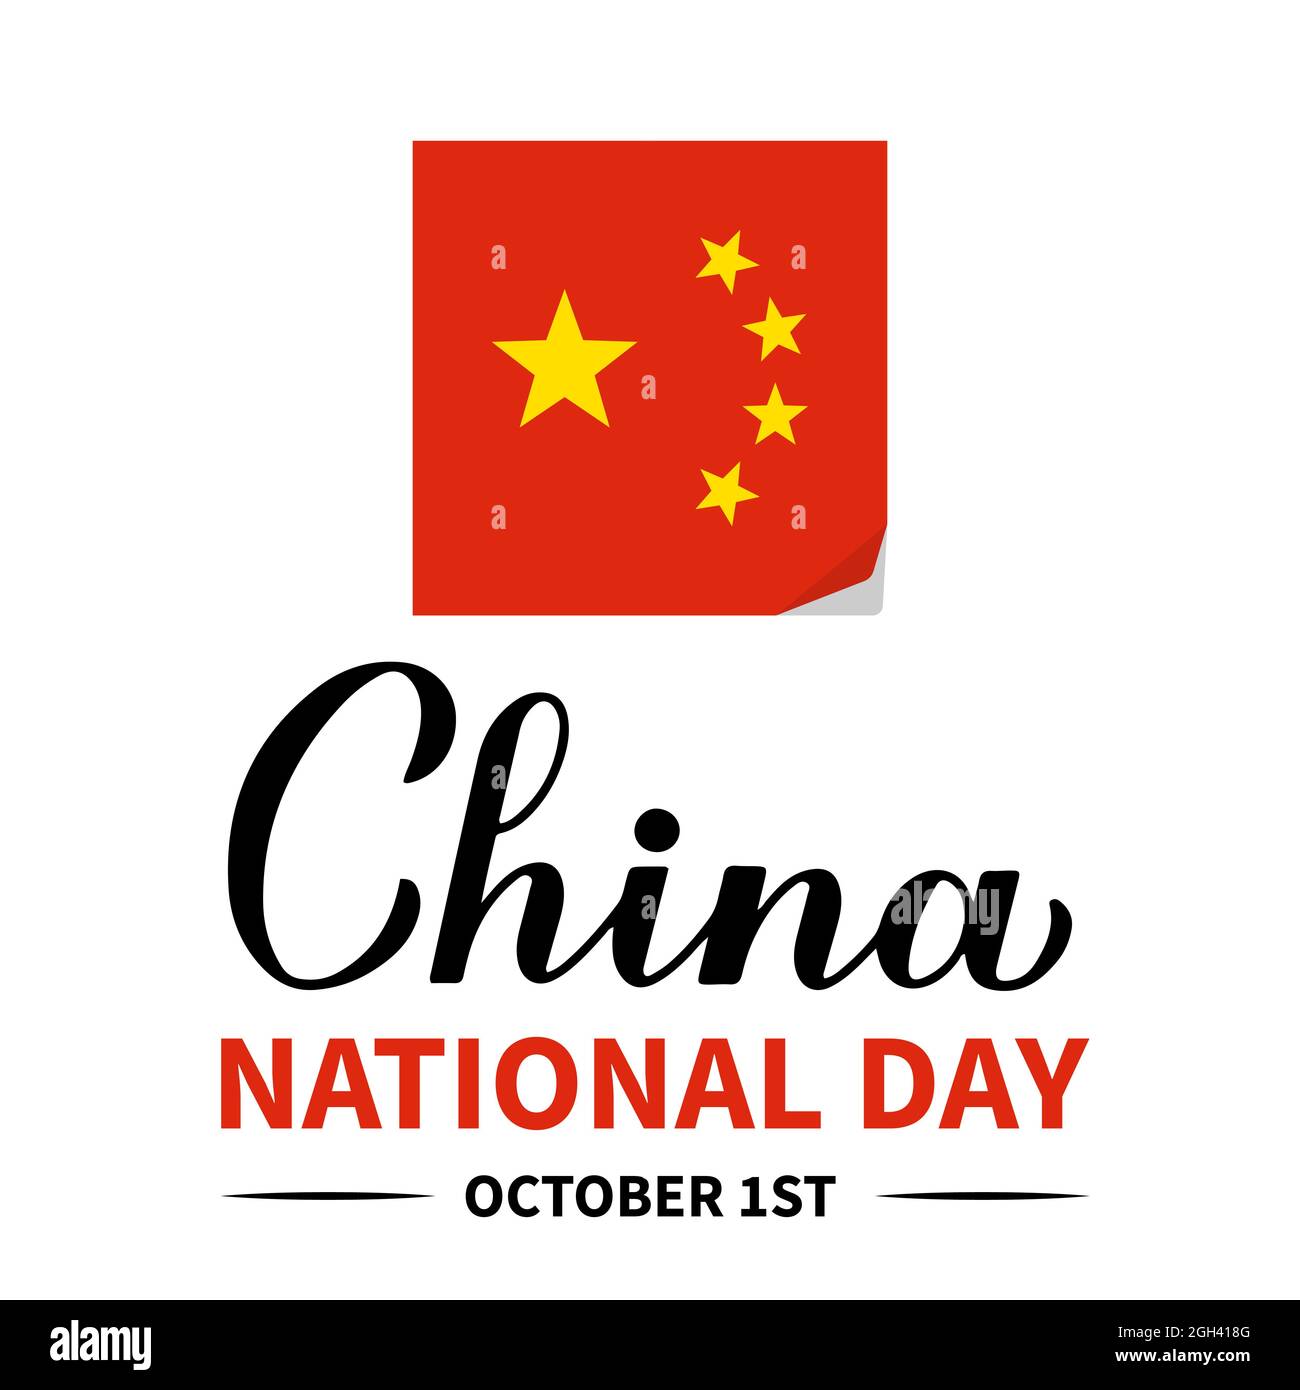 China National Day typography poster. Chinese holiday celebrated on